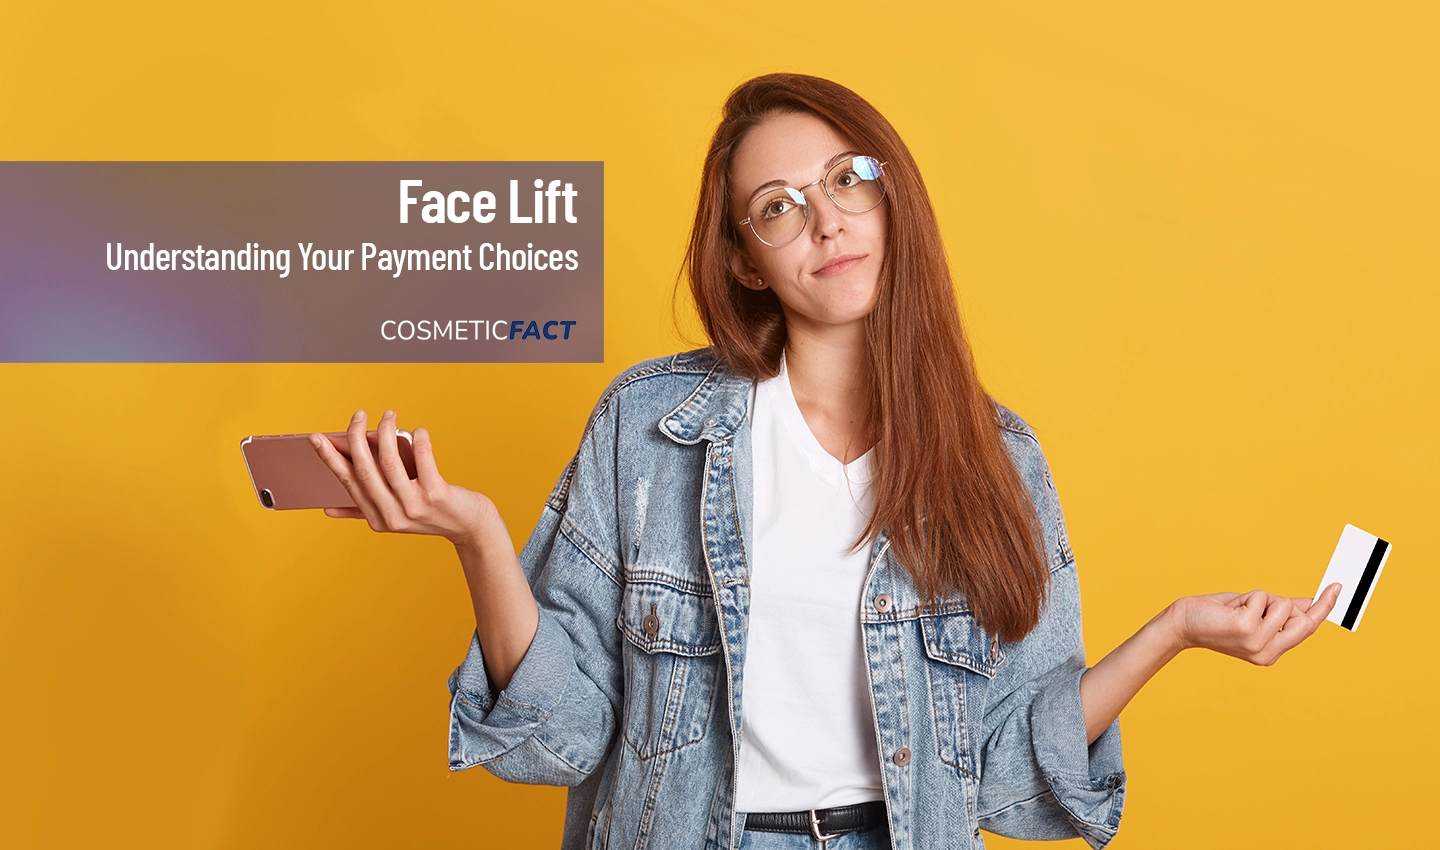 Lady hesitant about using credit options for facelift surgery